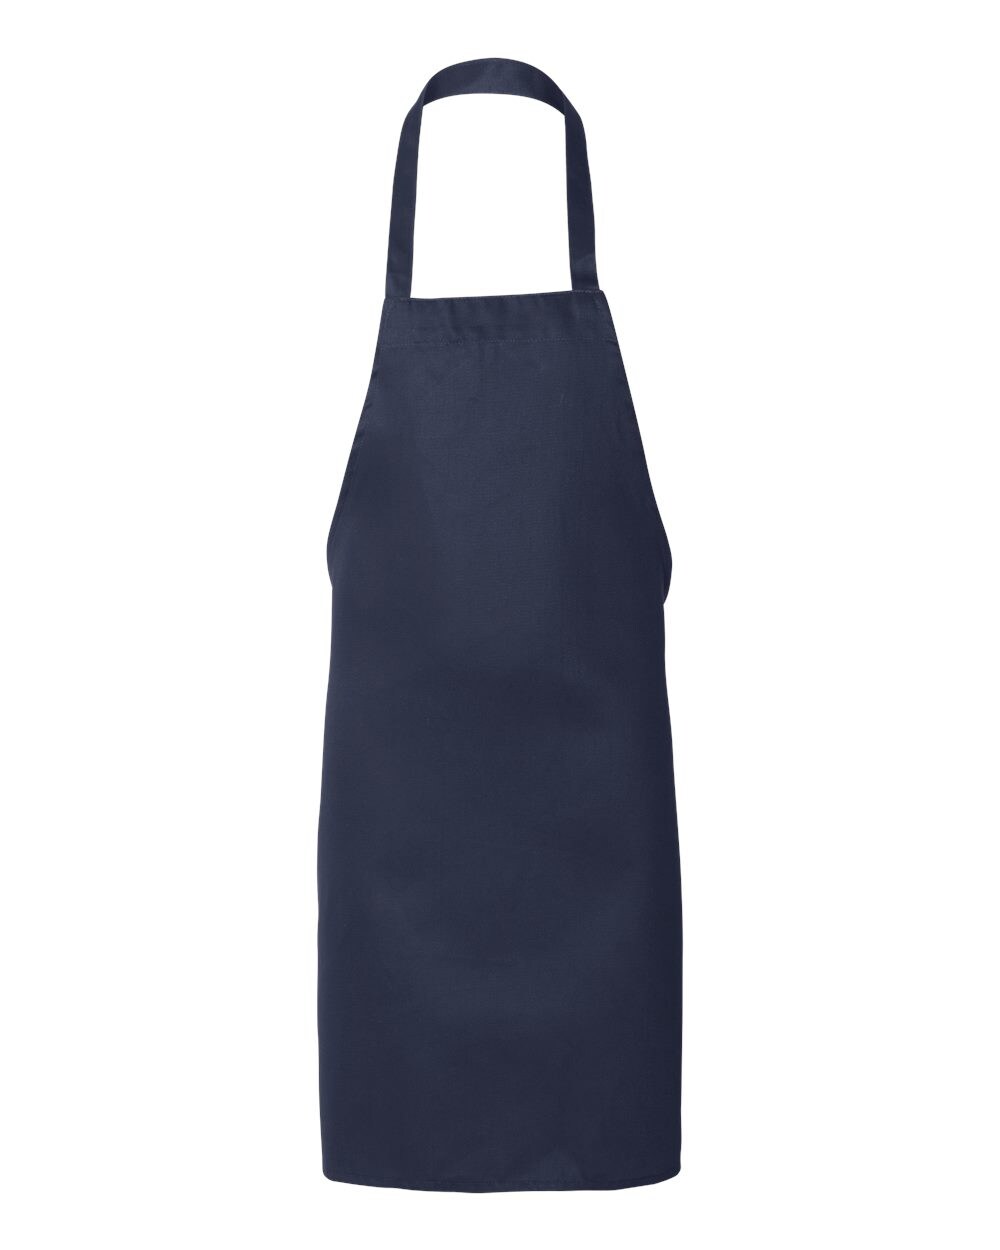 Heavy Duty Canvas Apron - Artist Apron With Pockets For Painting,  Waterproof And Adjustable